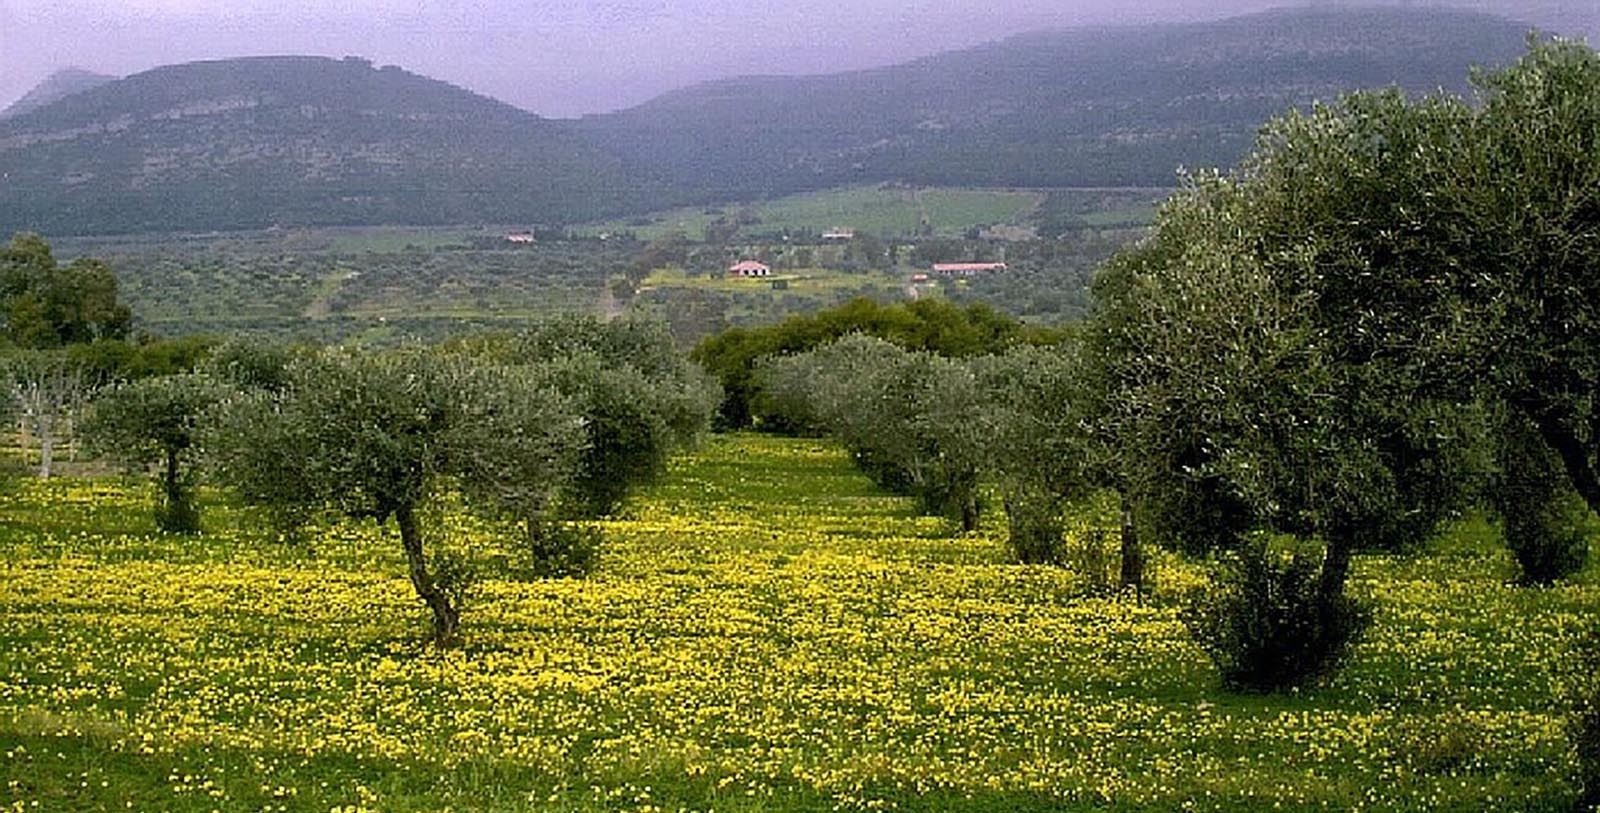 Taste the world-renowned olive oil of Sardinia, which has been cultivated for oil dating back to the 7th century B.C.